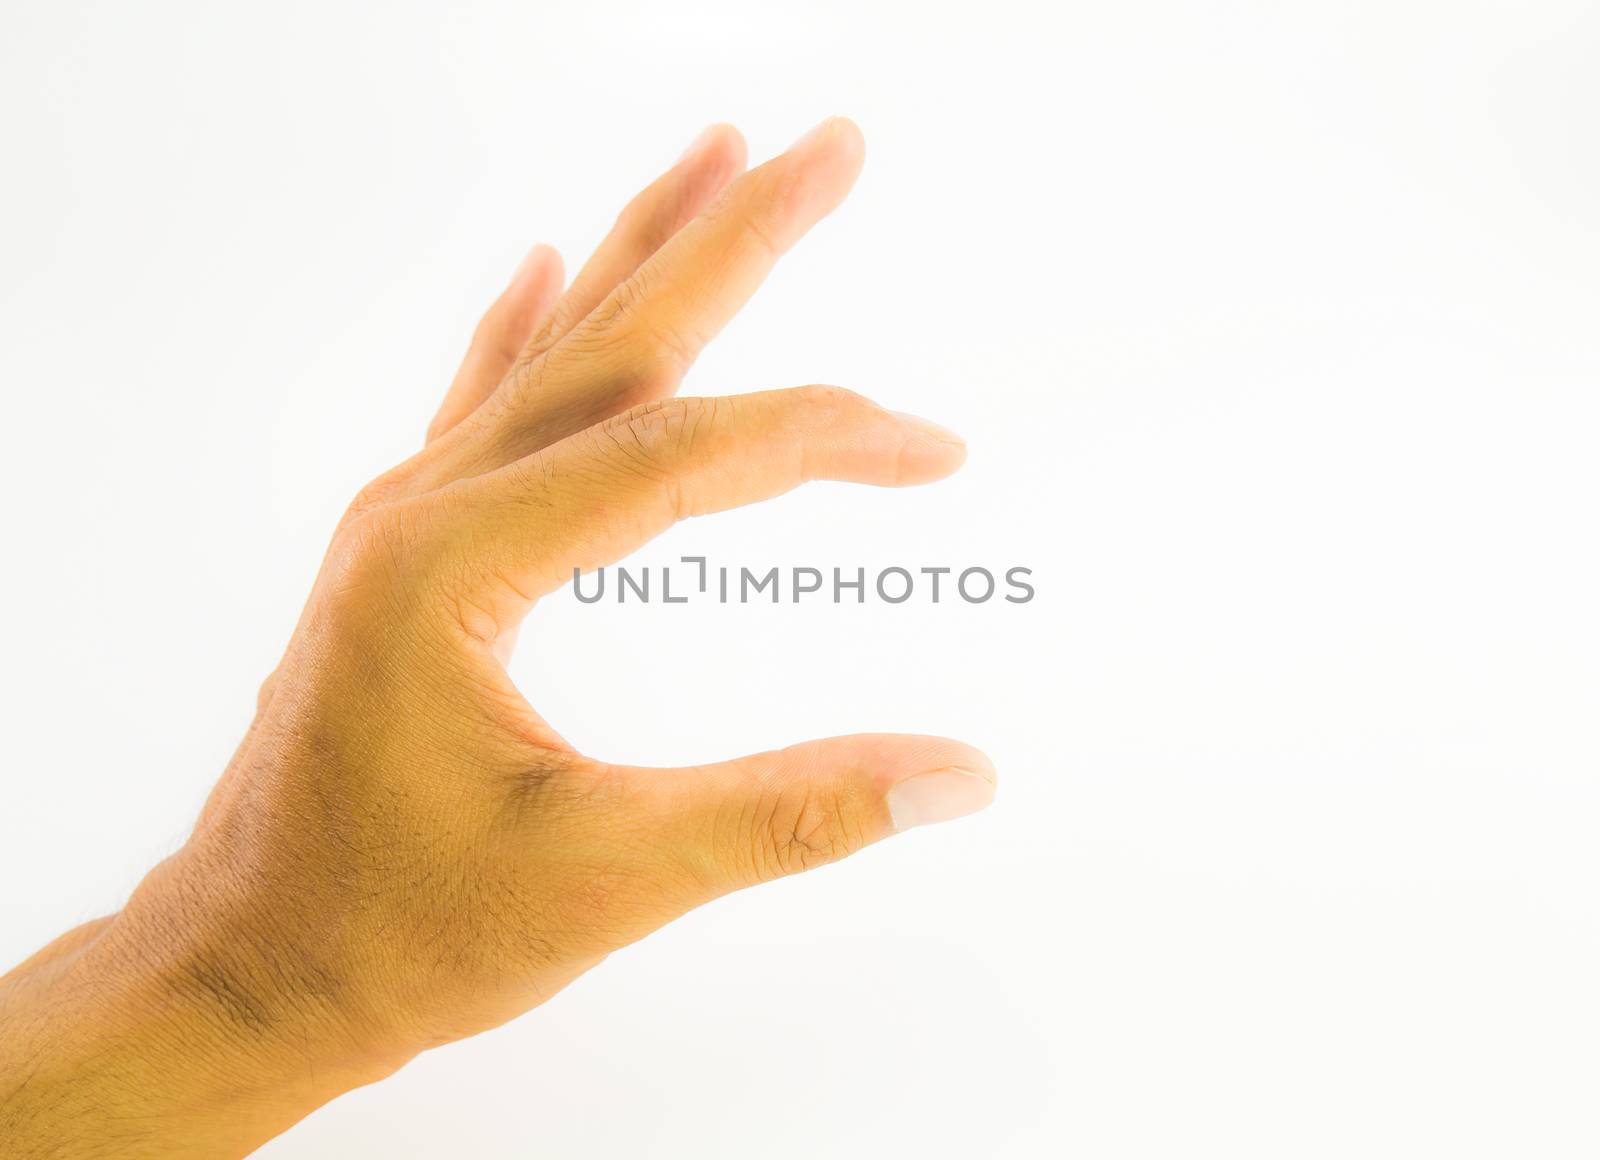 Hand measuring invisible items. Isolated on white background